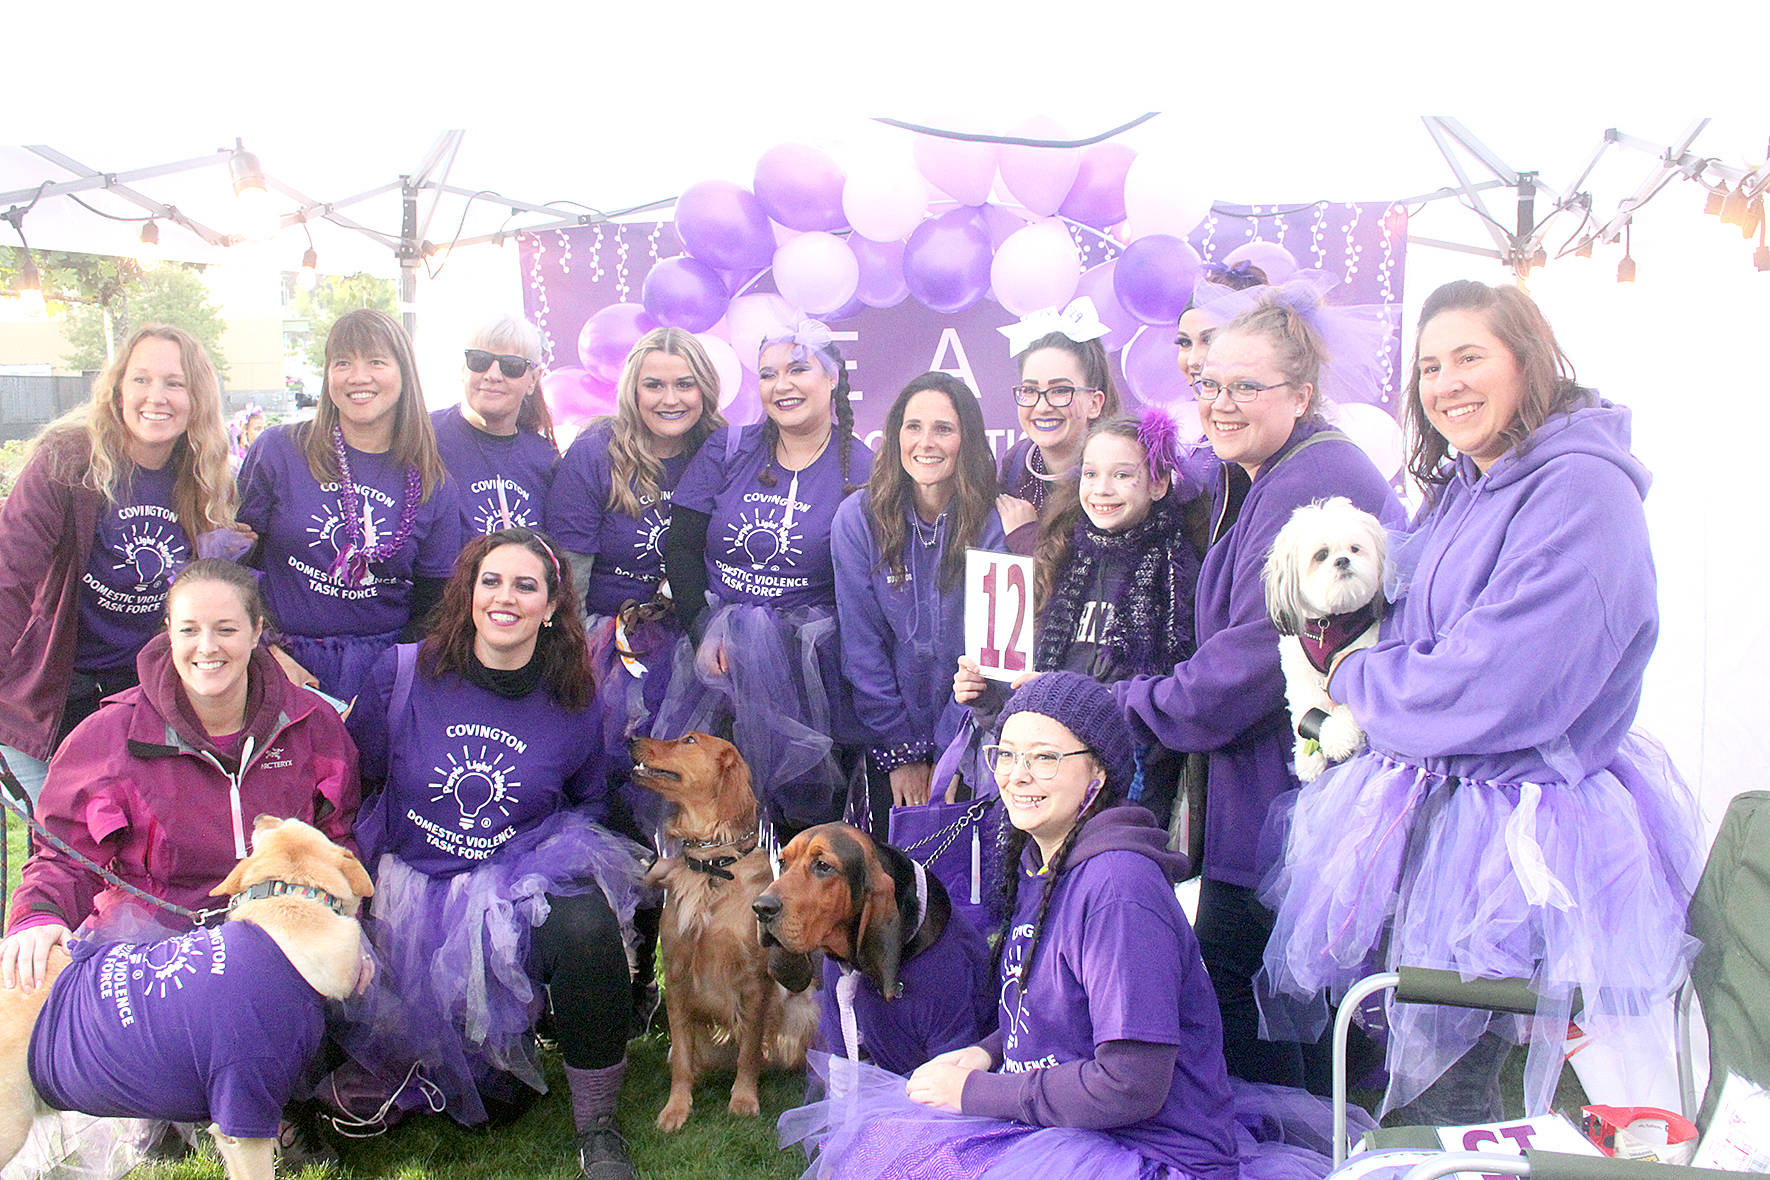 Marching in purple for survivors